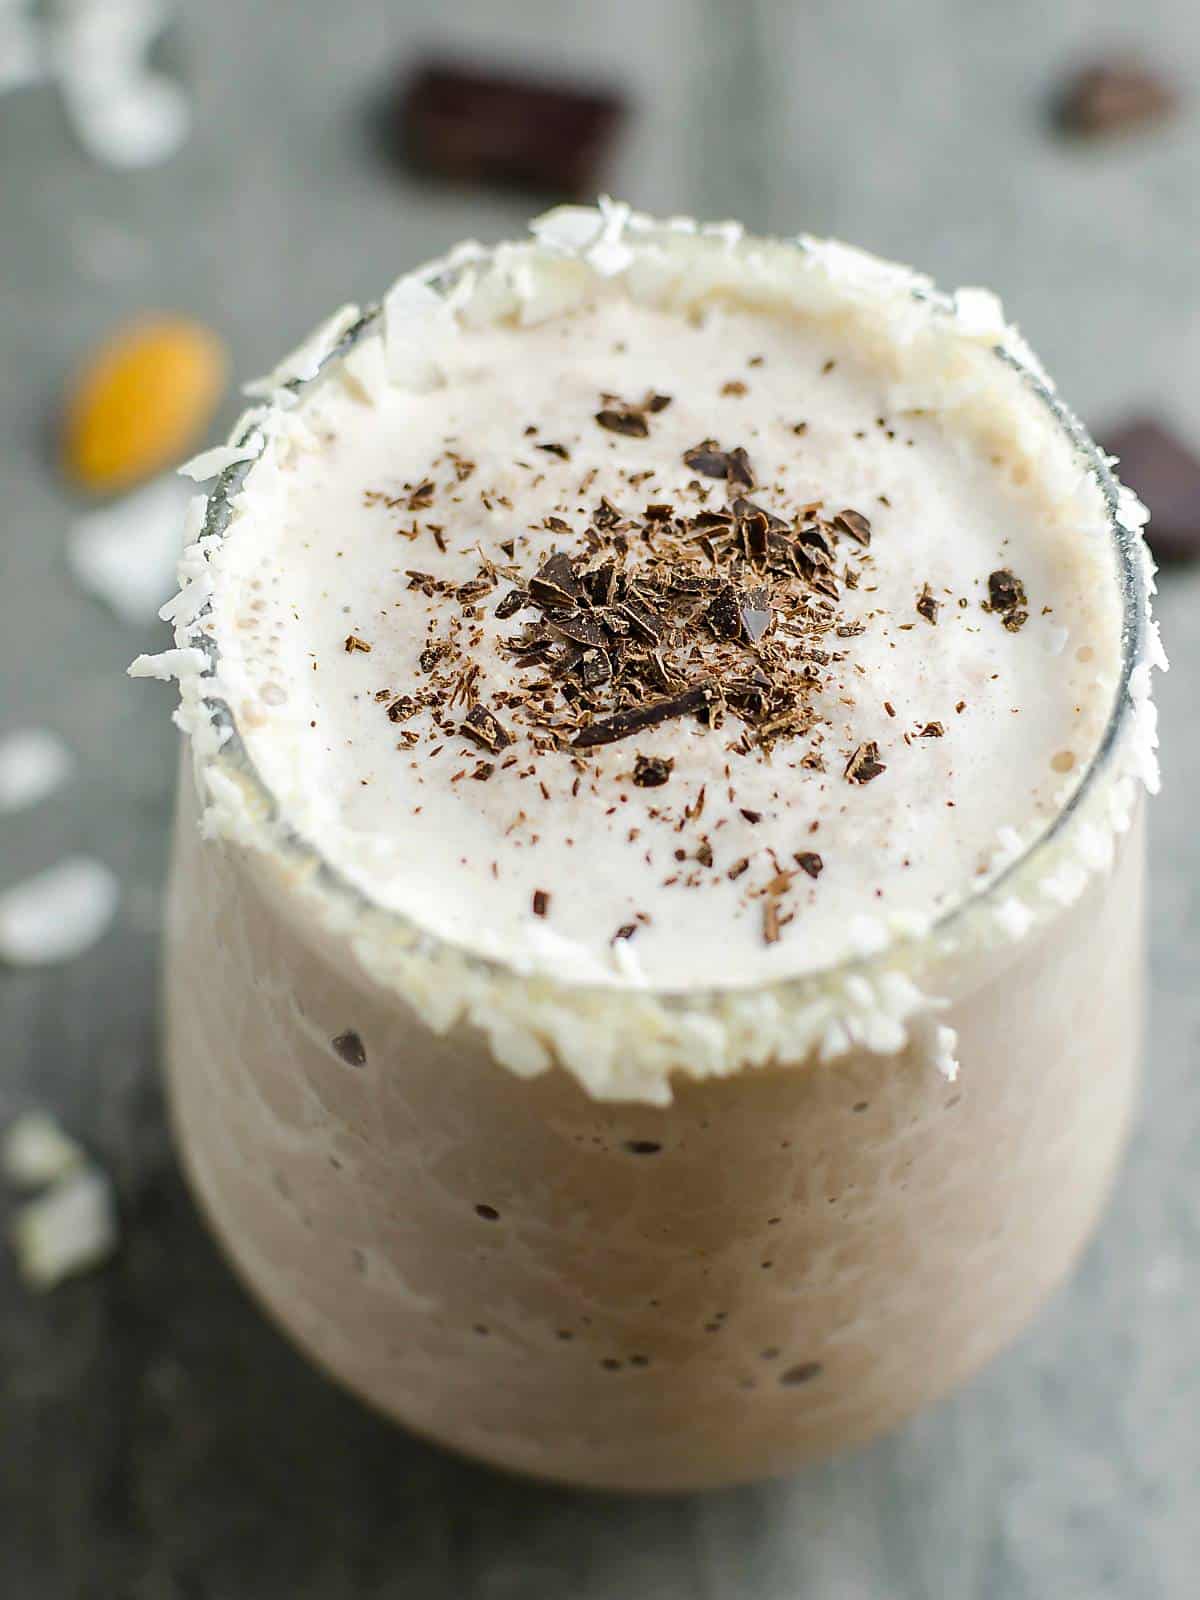 healthy almond joy smoothie in a glass rimmed with shredded coconut. Smoothie is topped with shaved dark chocolate.